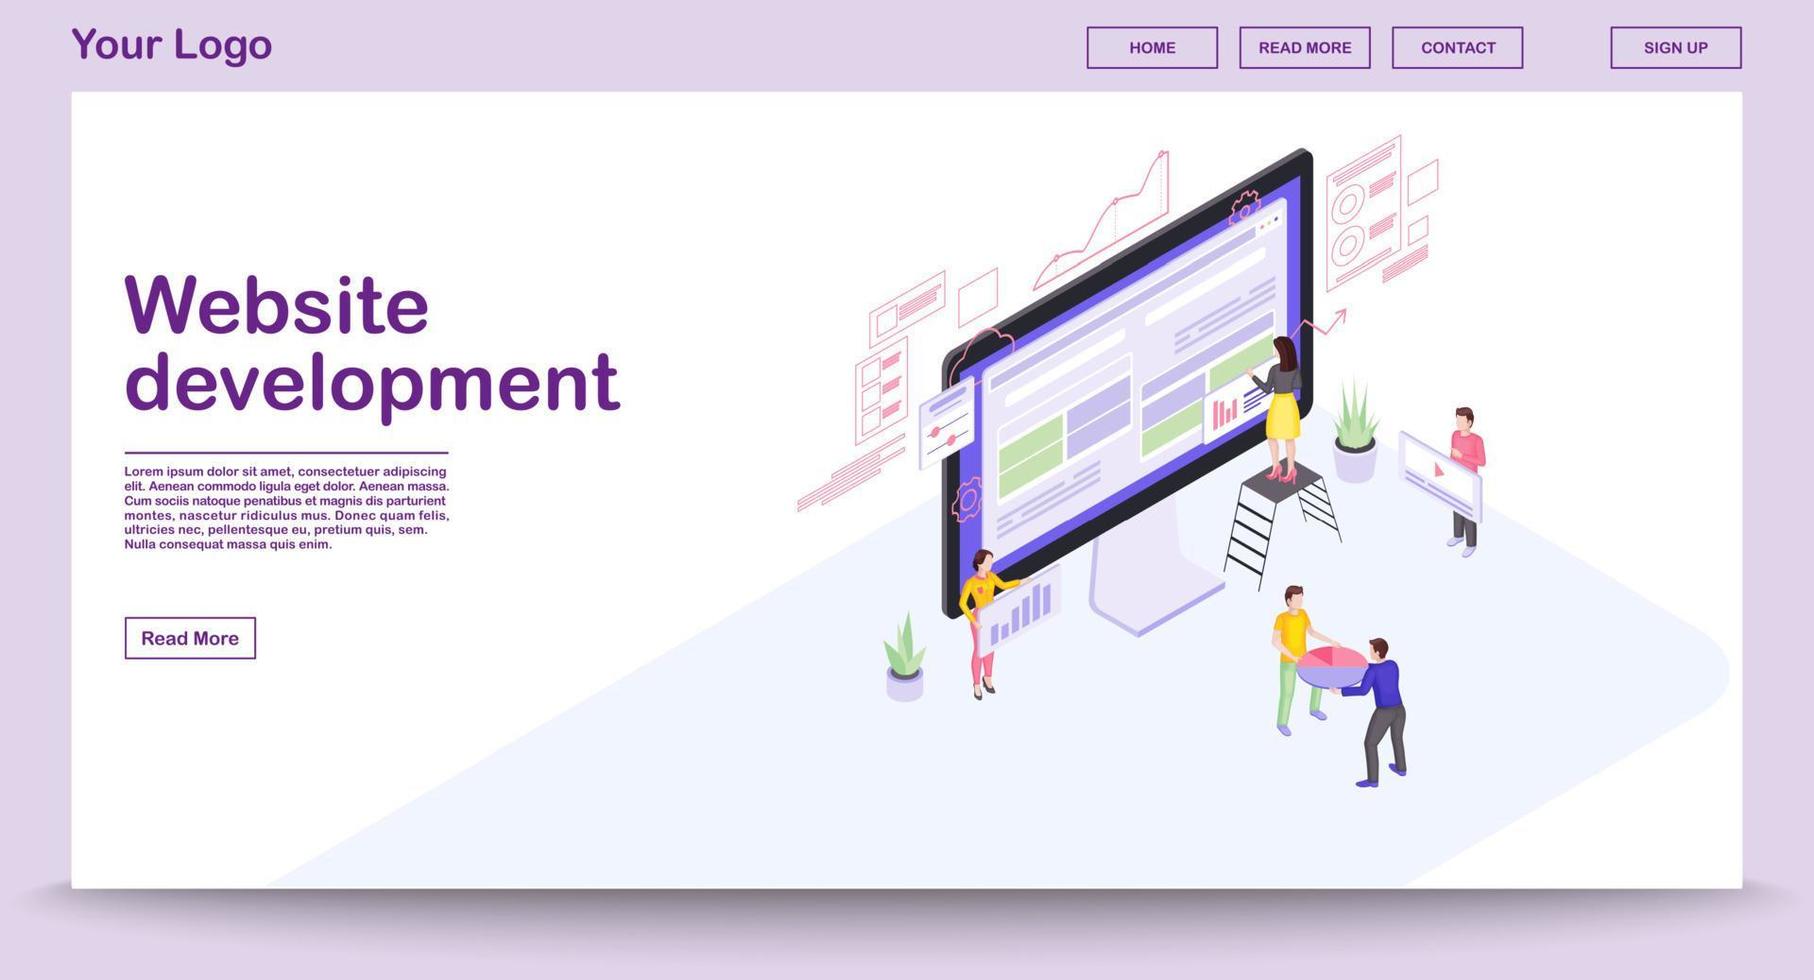 Website development webpage vector template with isometric illustration